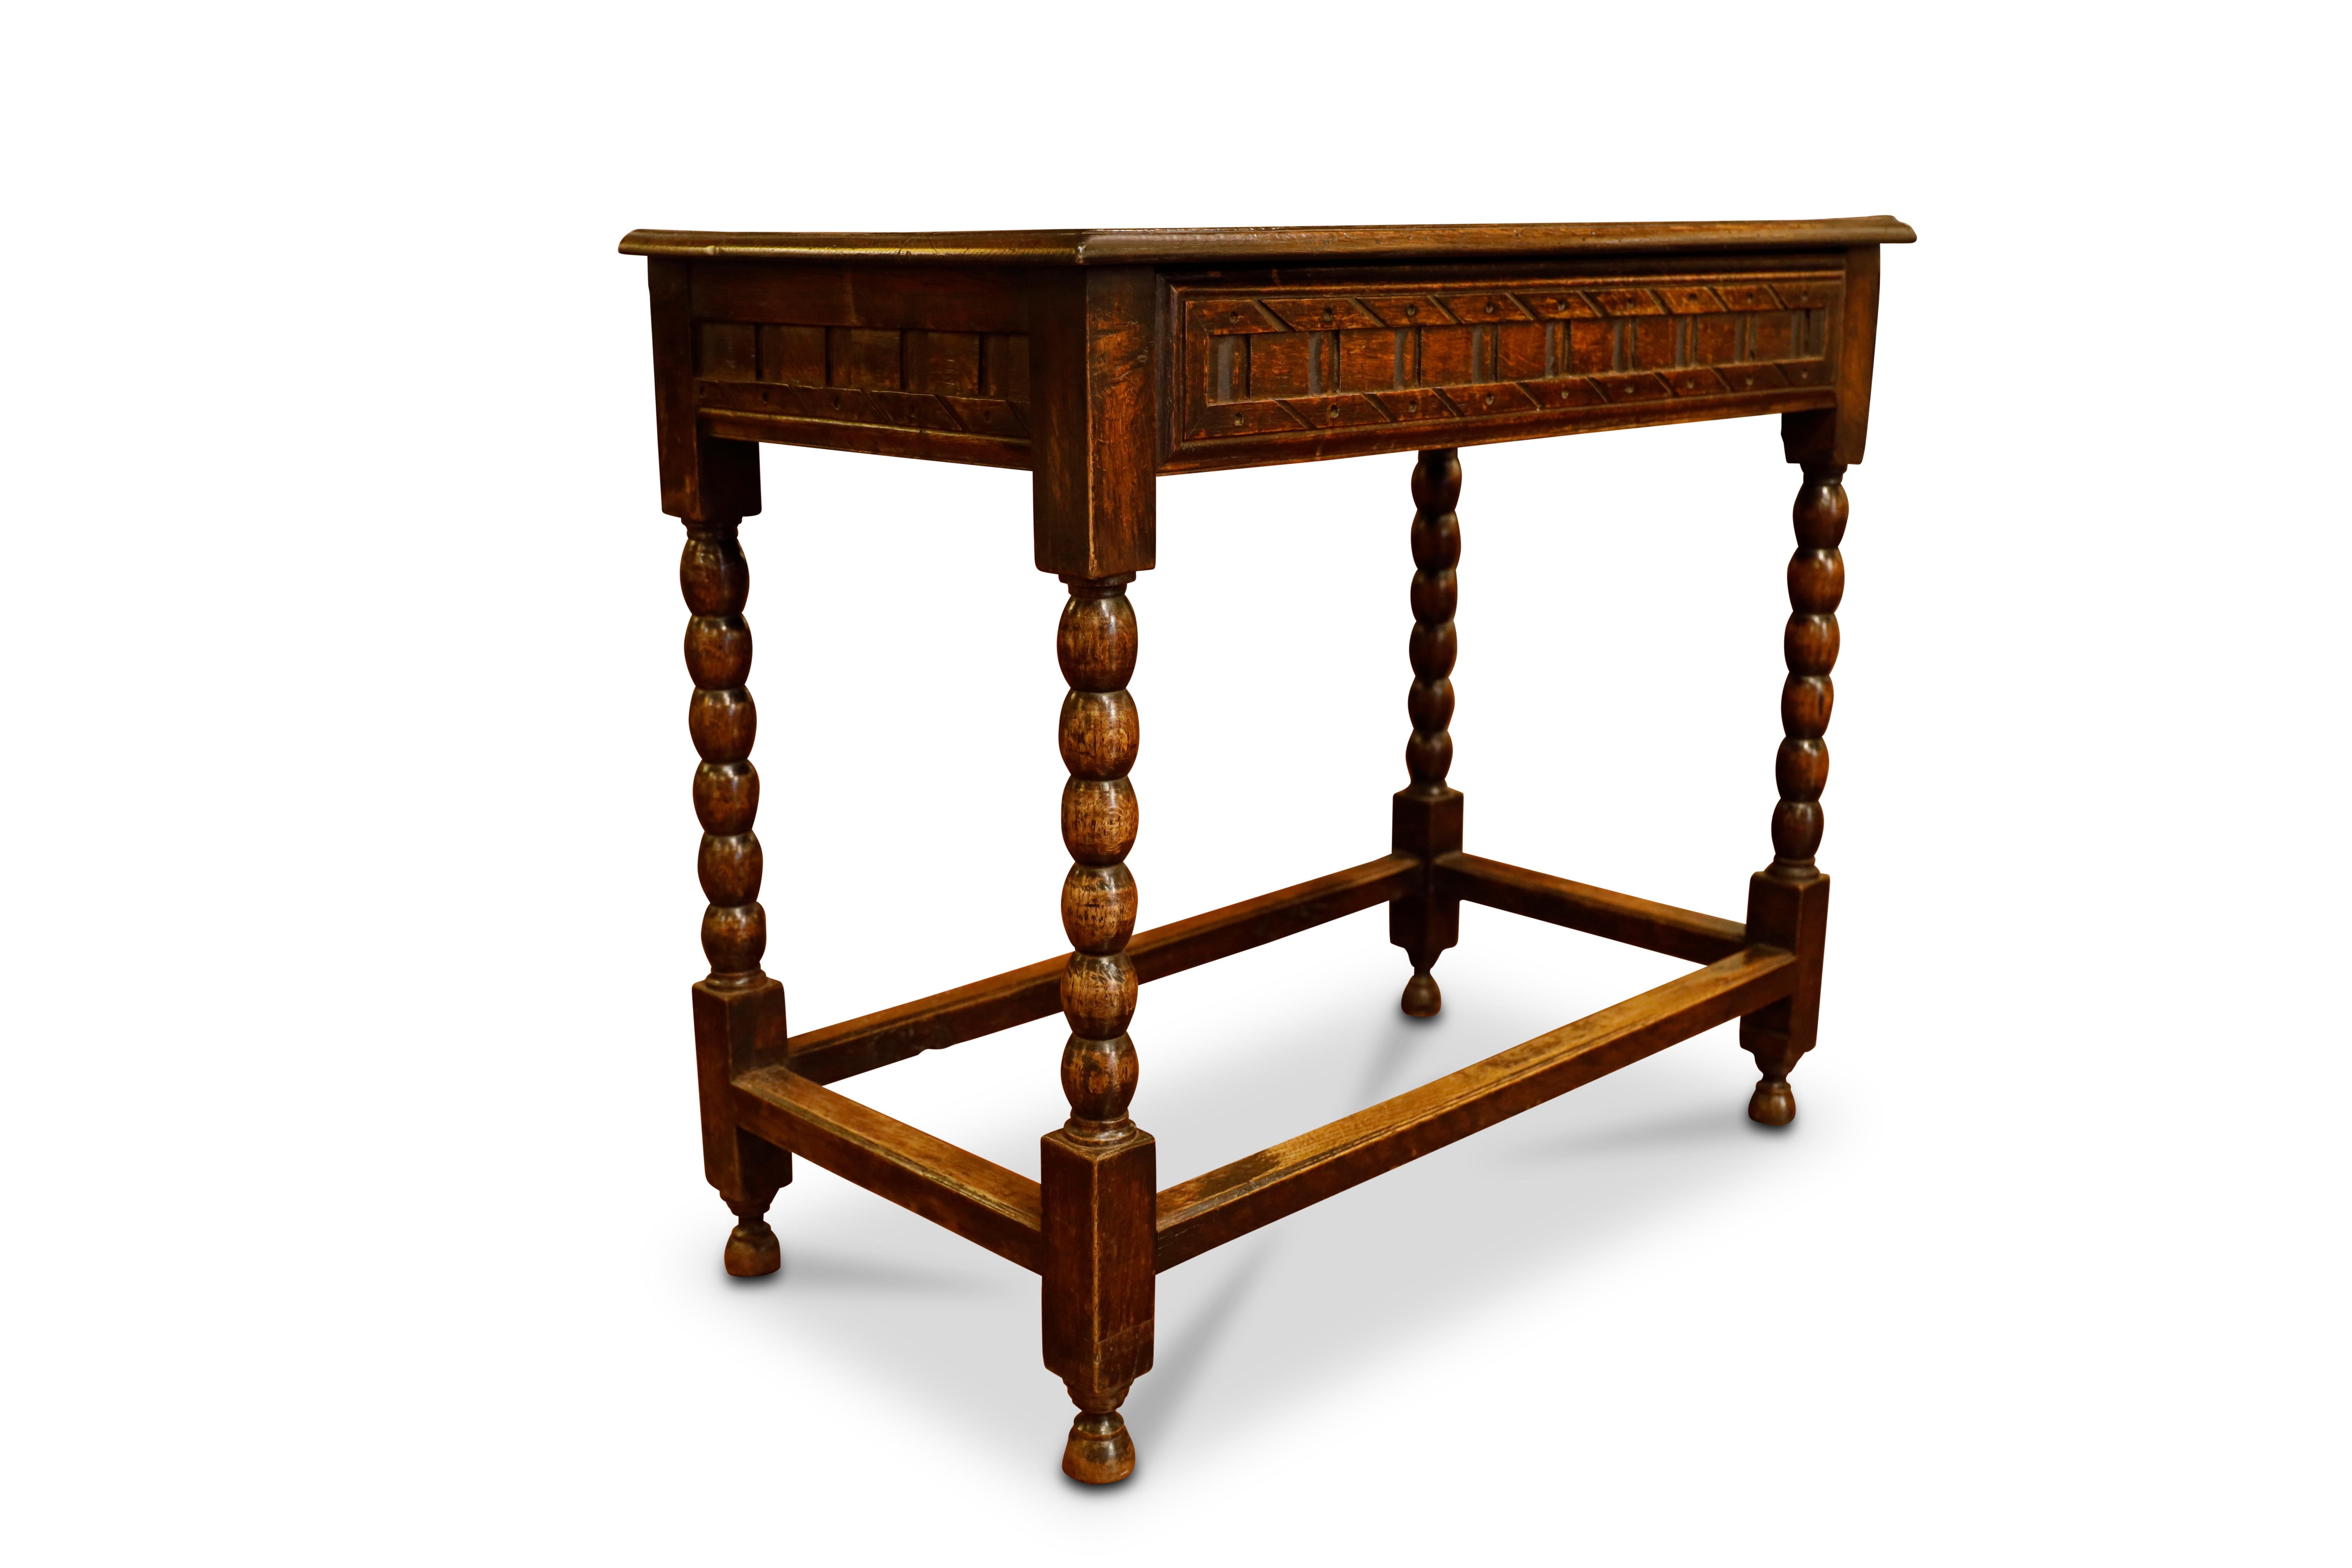 English carved oak writing / side table. Top has peg capped dowels and carved edges.  Single carved front drawer.  Standing on bobbin turned legs ending with bun feet connected by stretchers.